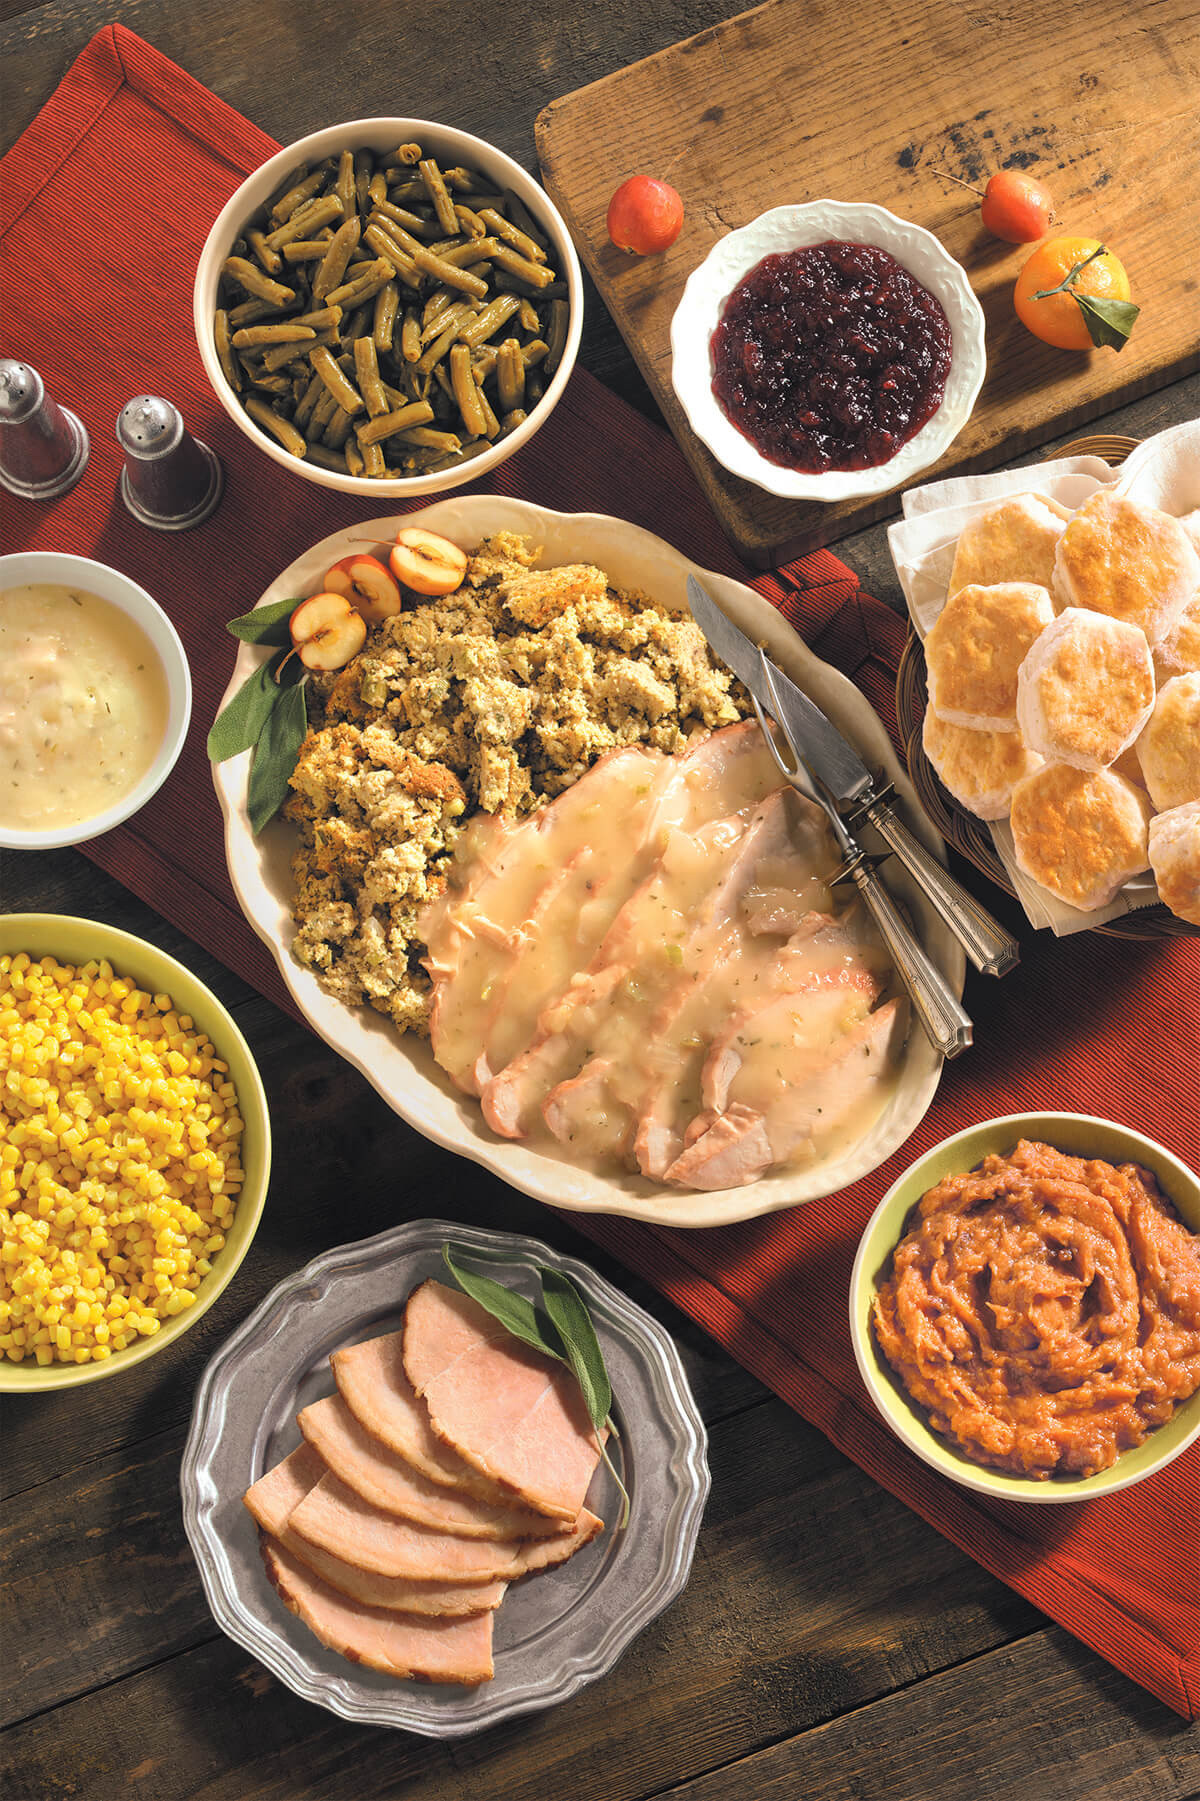 To Go Thanksgiving Dinners
 Cracker Barrel to Serve 1 4 Million Meals This